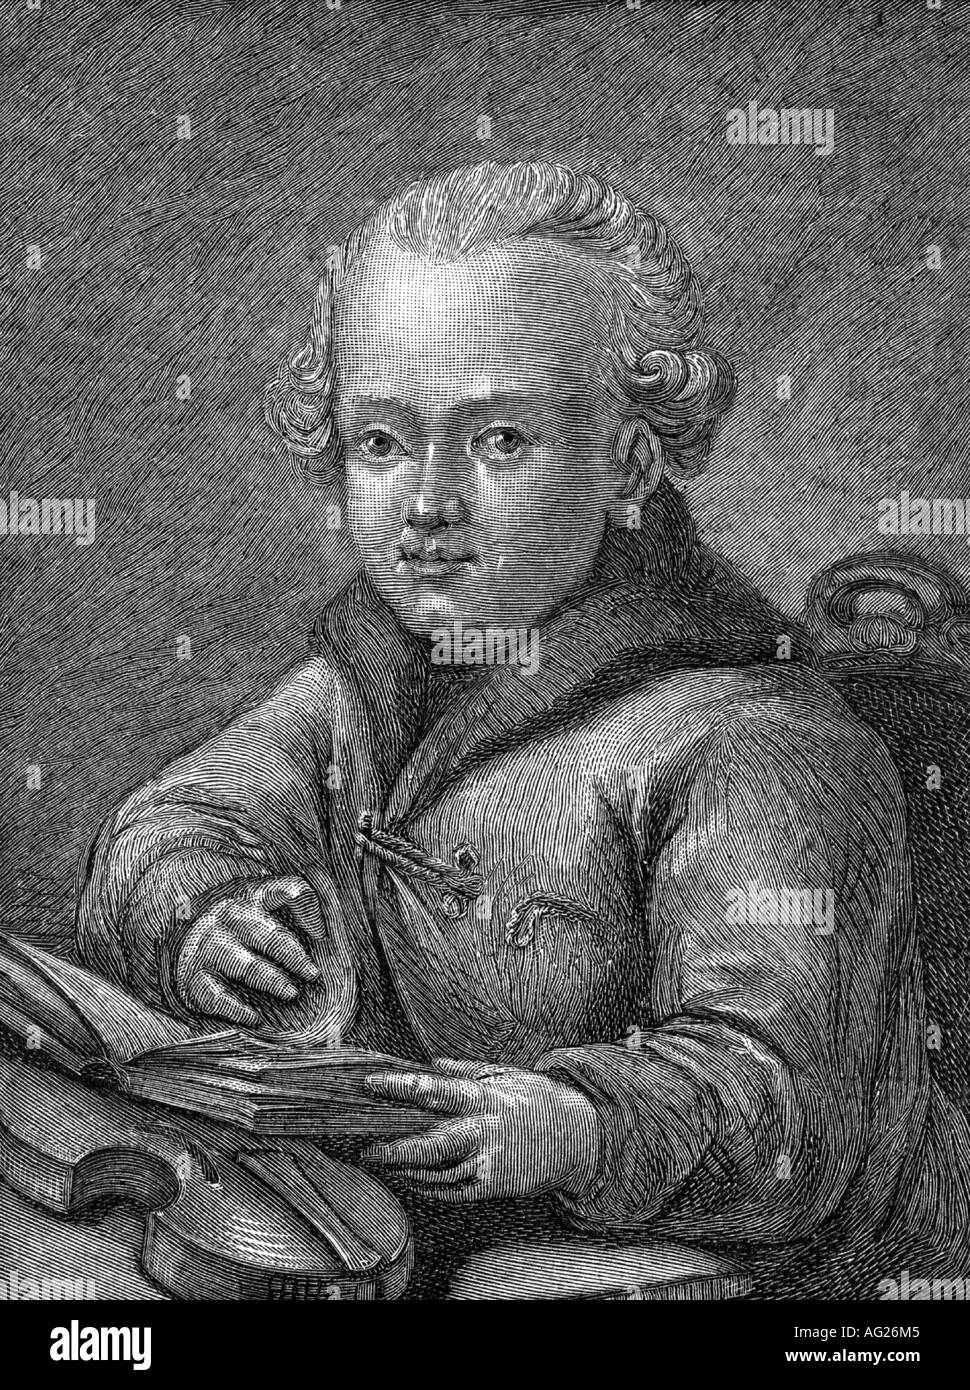 Mozart, Wolfgang Amadeus, 27.1.1756 - 5.12.1791, Austrian composer, half length, as a boy (aged 13 years), wood engraving, after painting by Carl Christian Klass, 18th century, Stock Photo